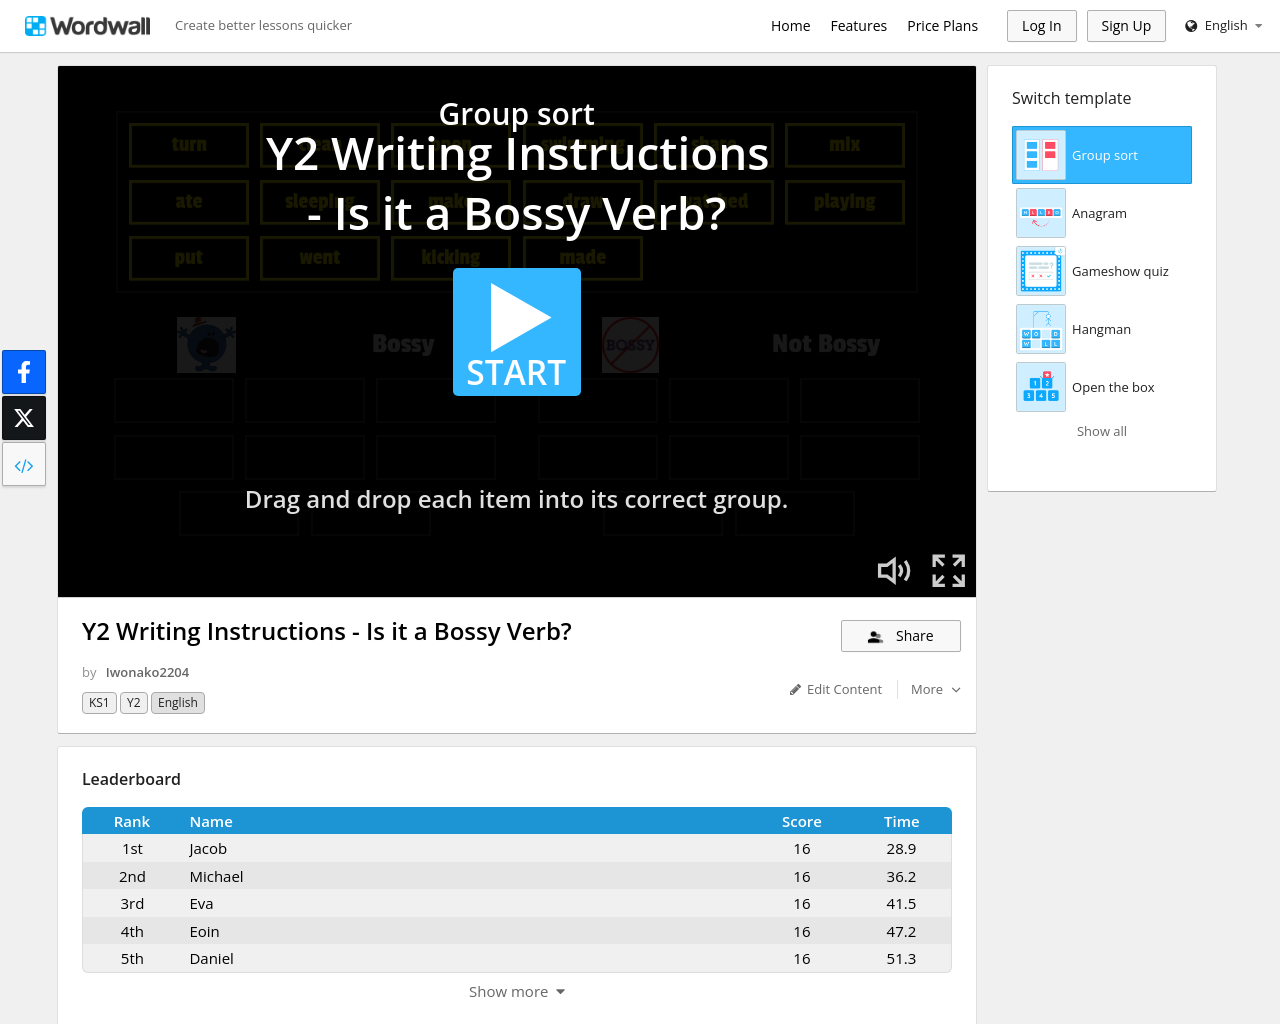 Is it a Bossy verb?